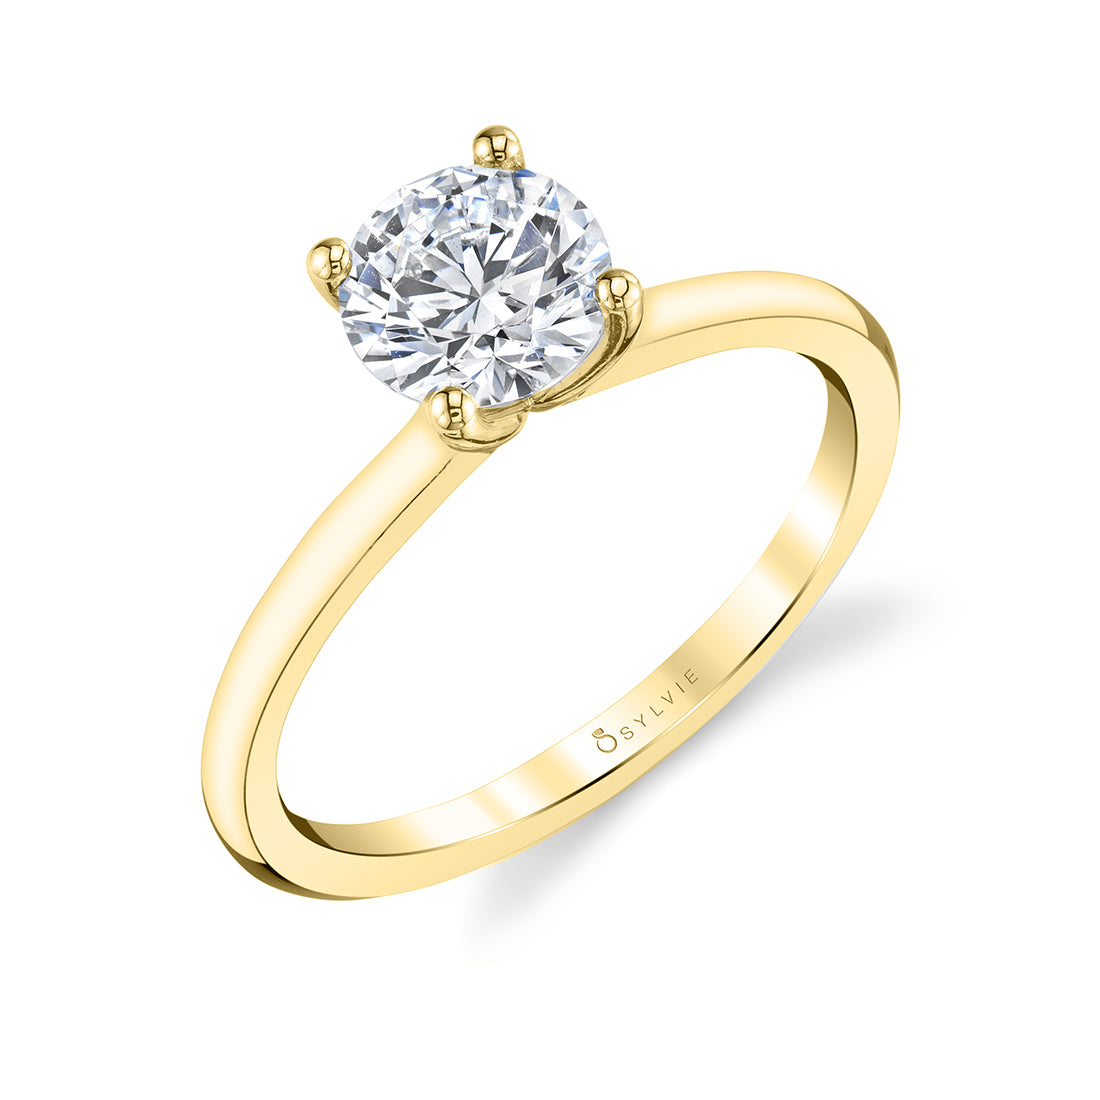 Sylvie 14K Yellow Gold "Dominique" Solitaire Engagement Ring